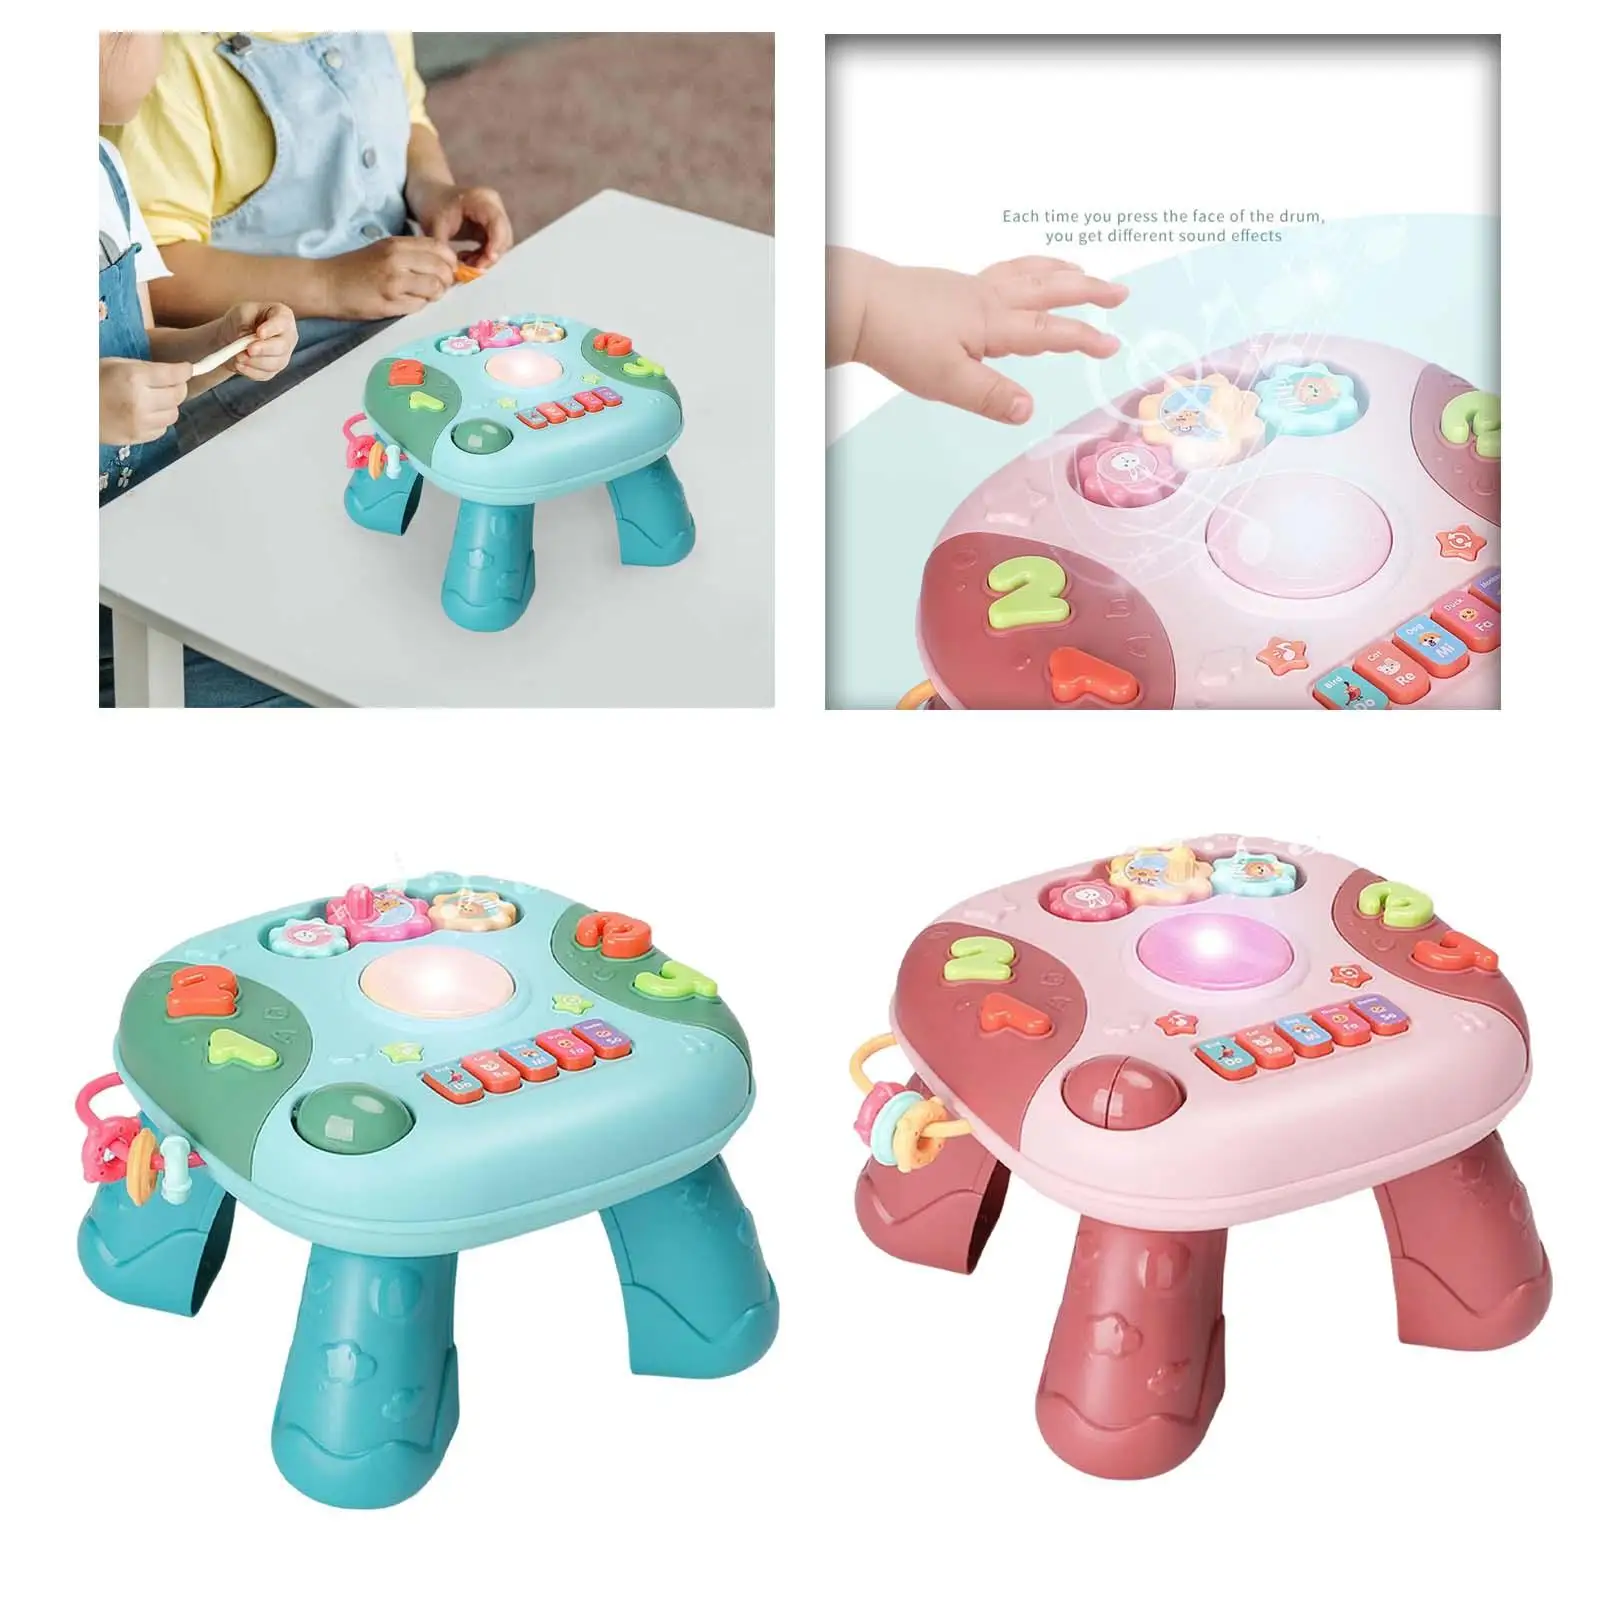 Portable Musical Learning Table Sensory Sound Toy Early Development Activity Toy Educational Learning Toy for Children Kids